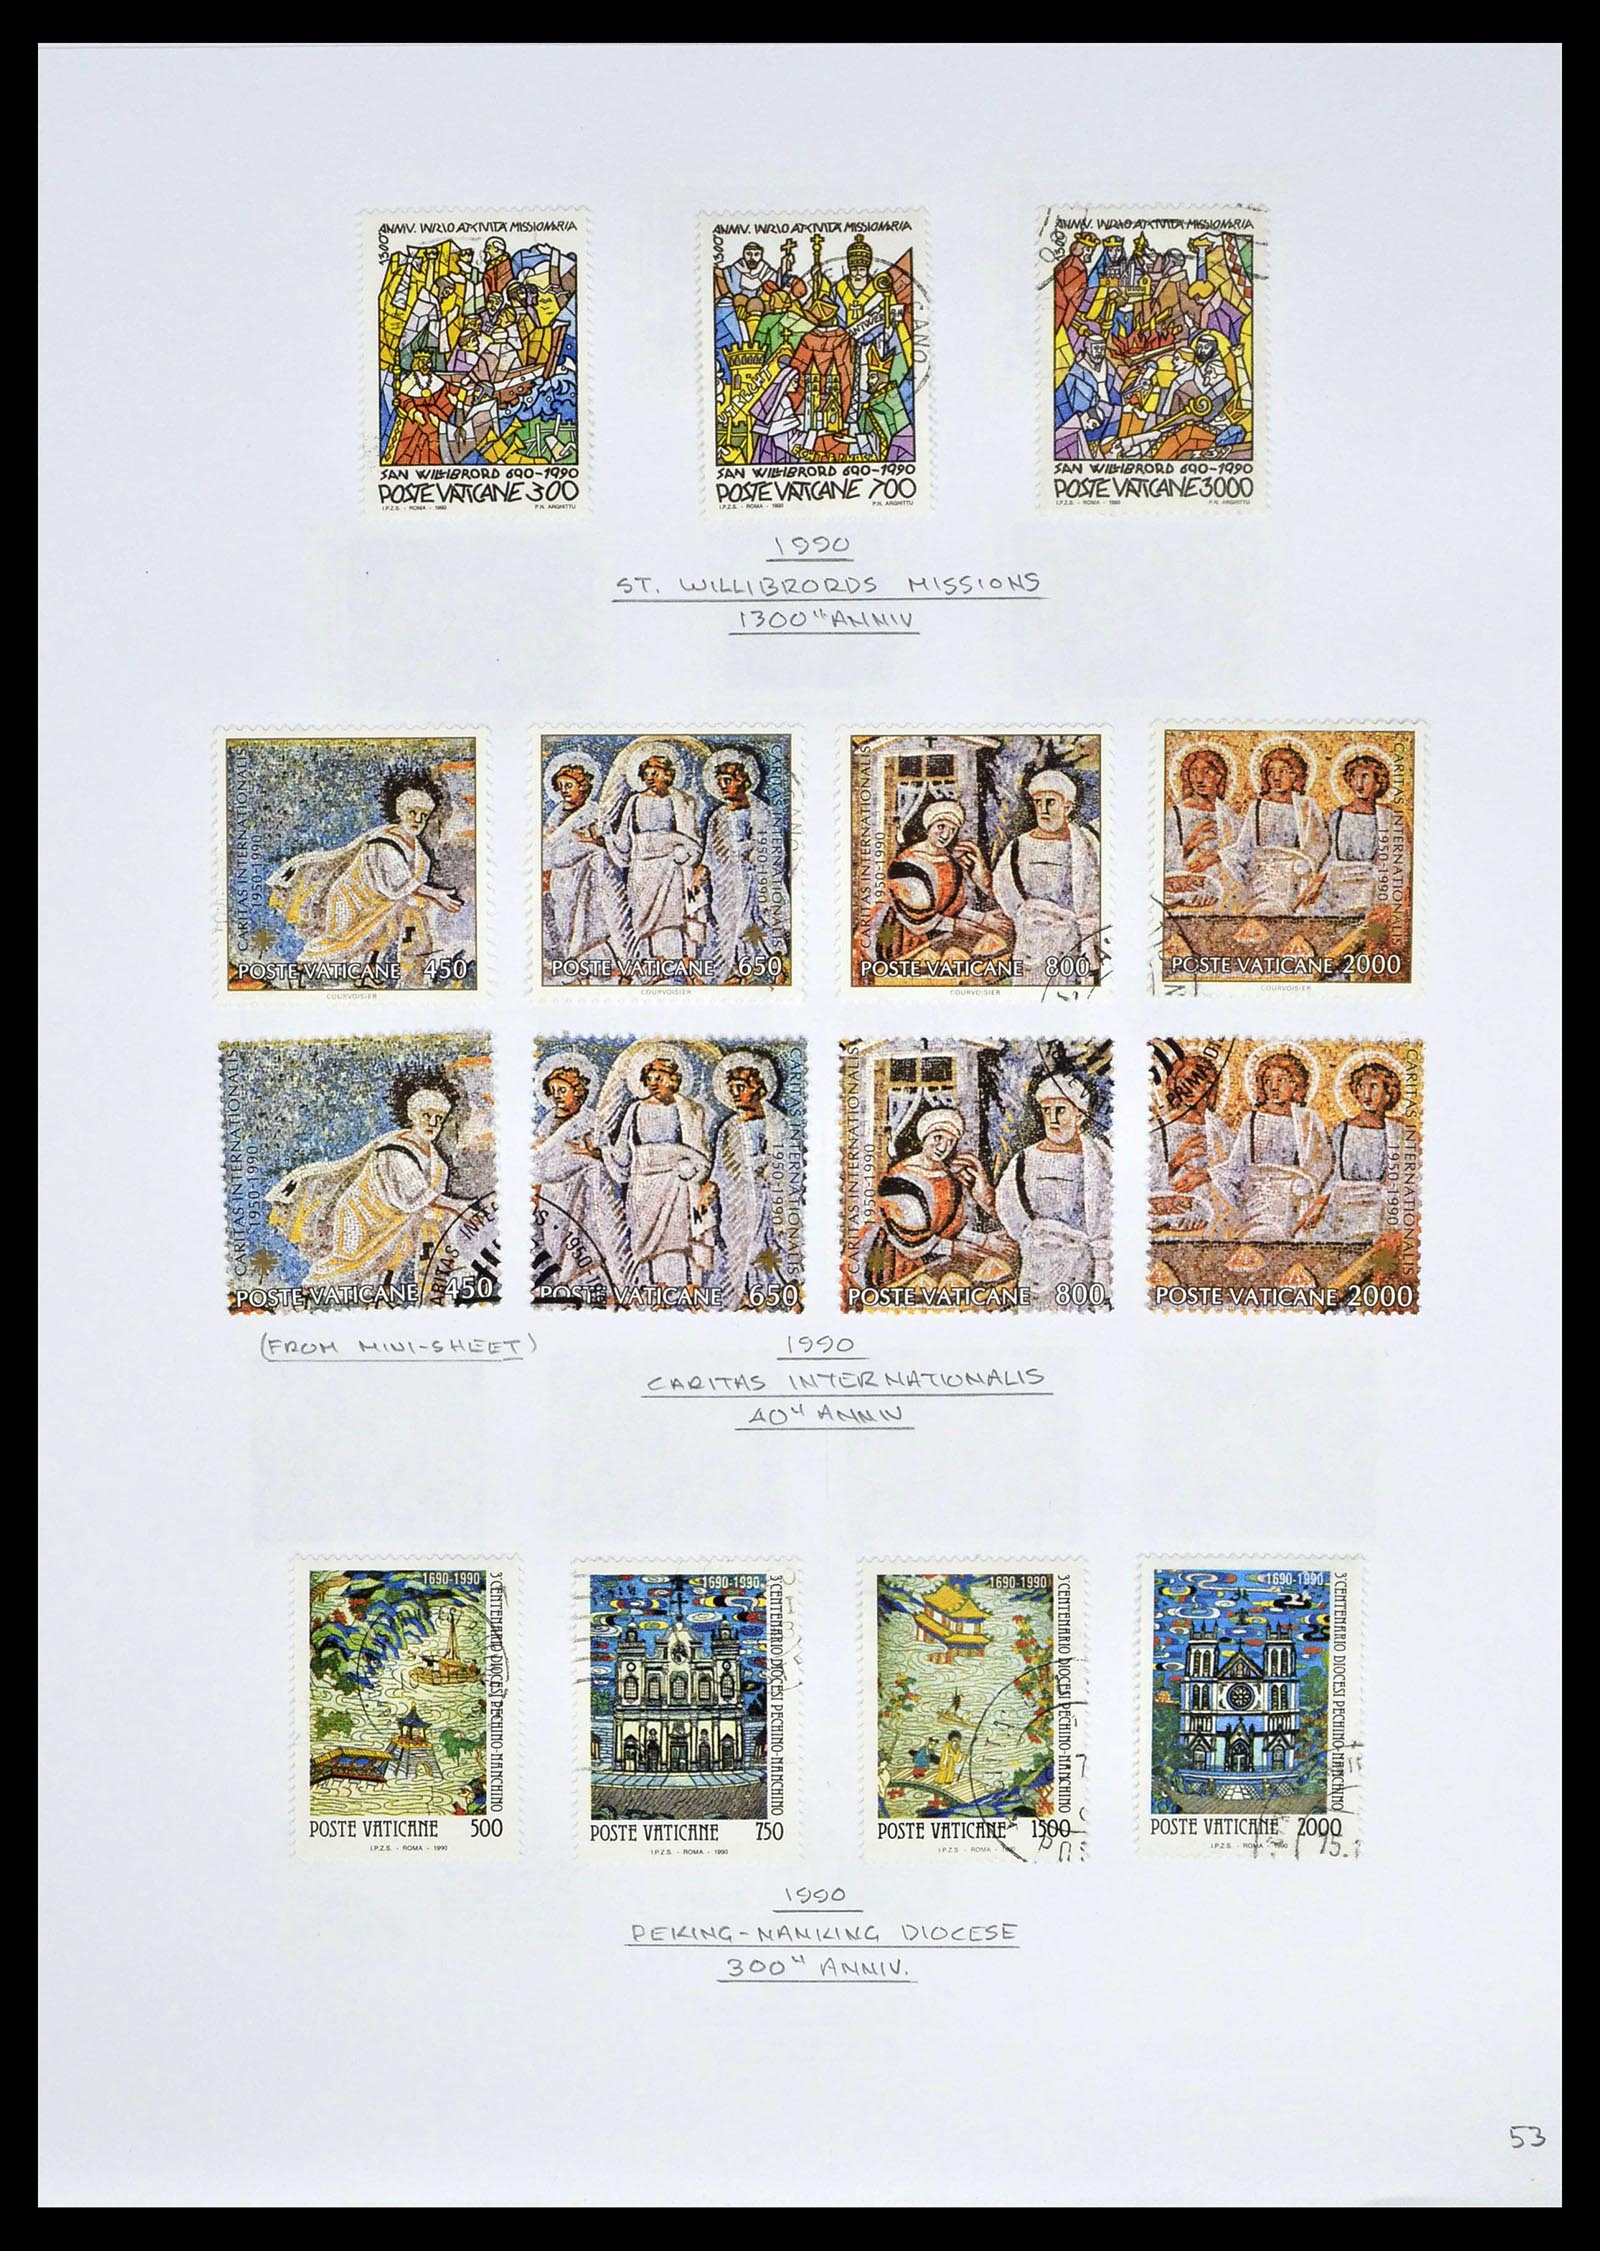 39099 0055 - Stamp collection 39099 Vatican 1852-2008.